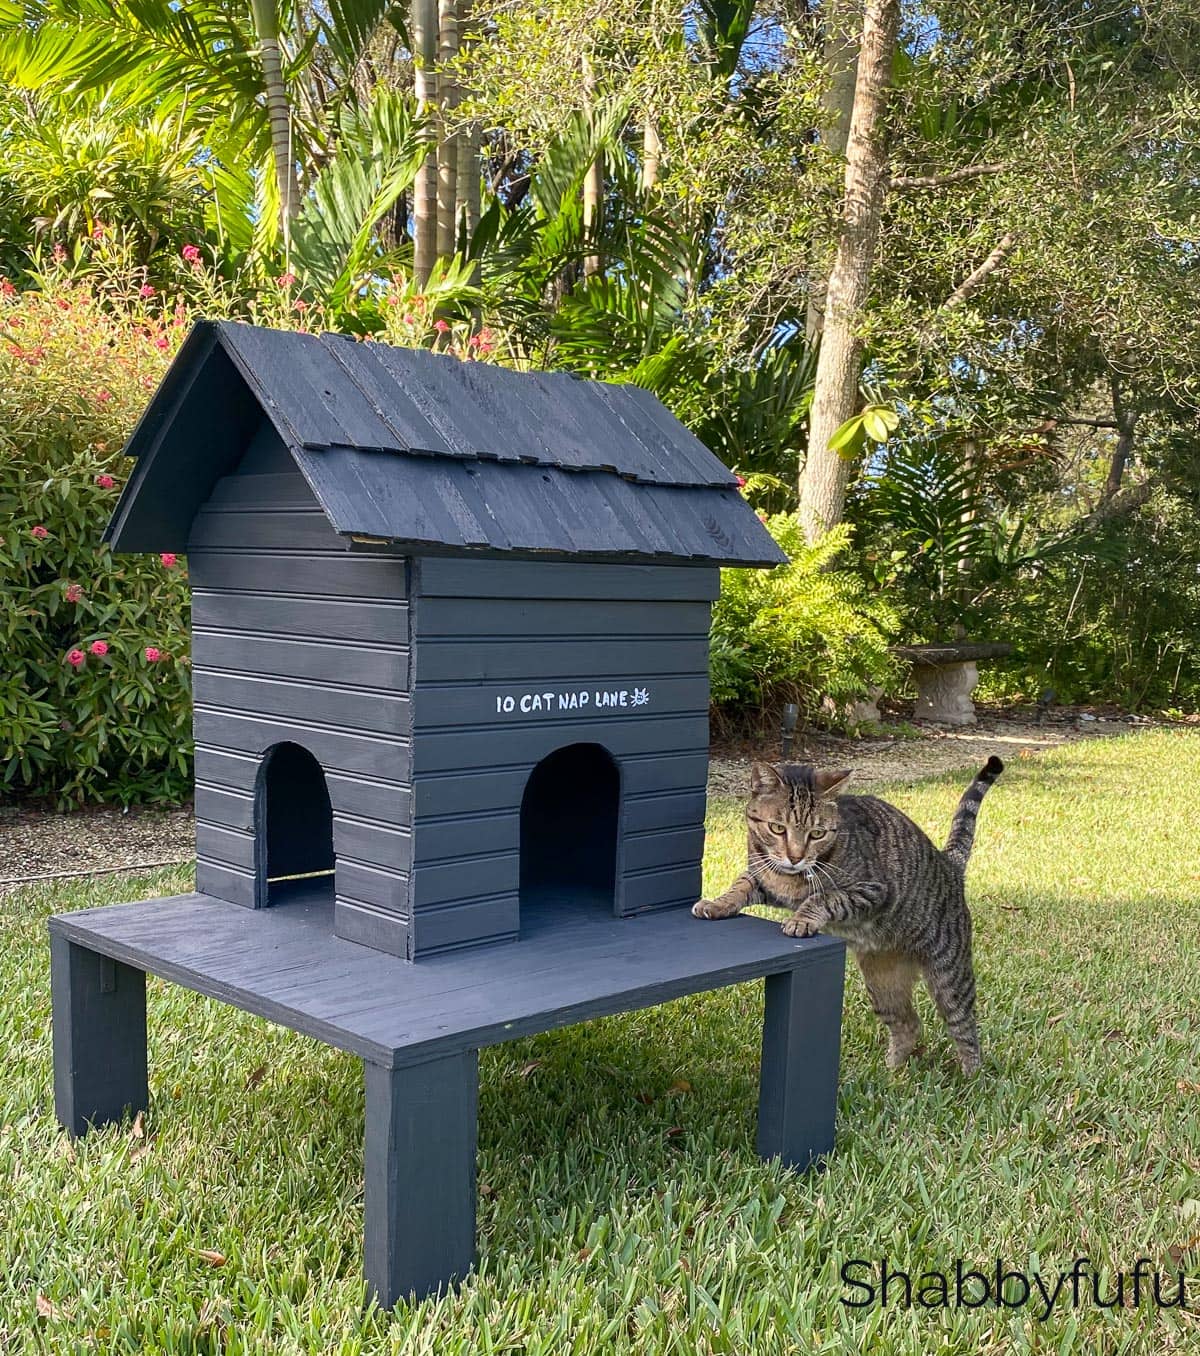 How To Build An Outdoor Cat House Shelter – DIY